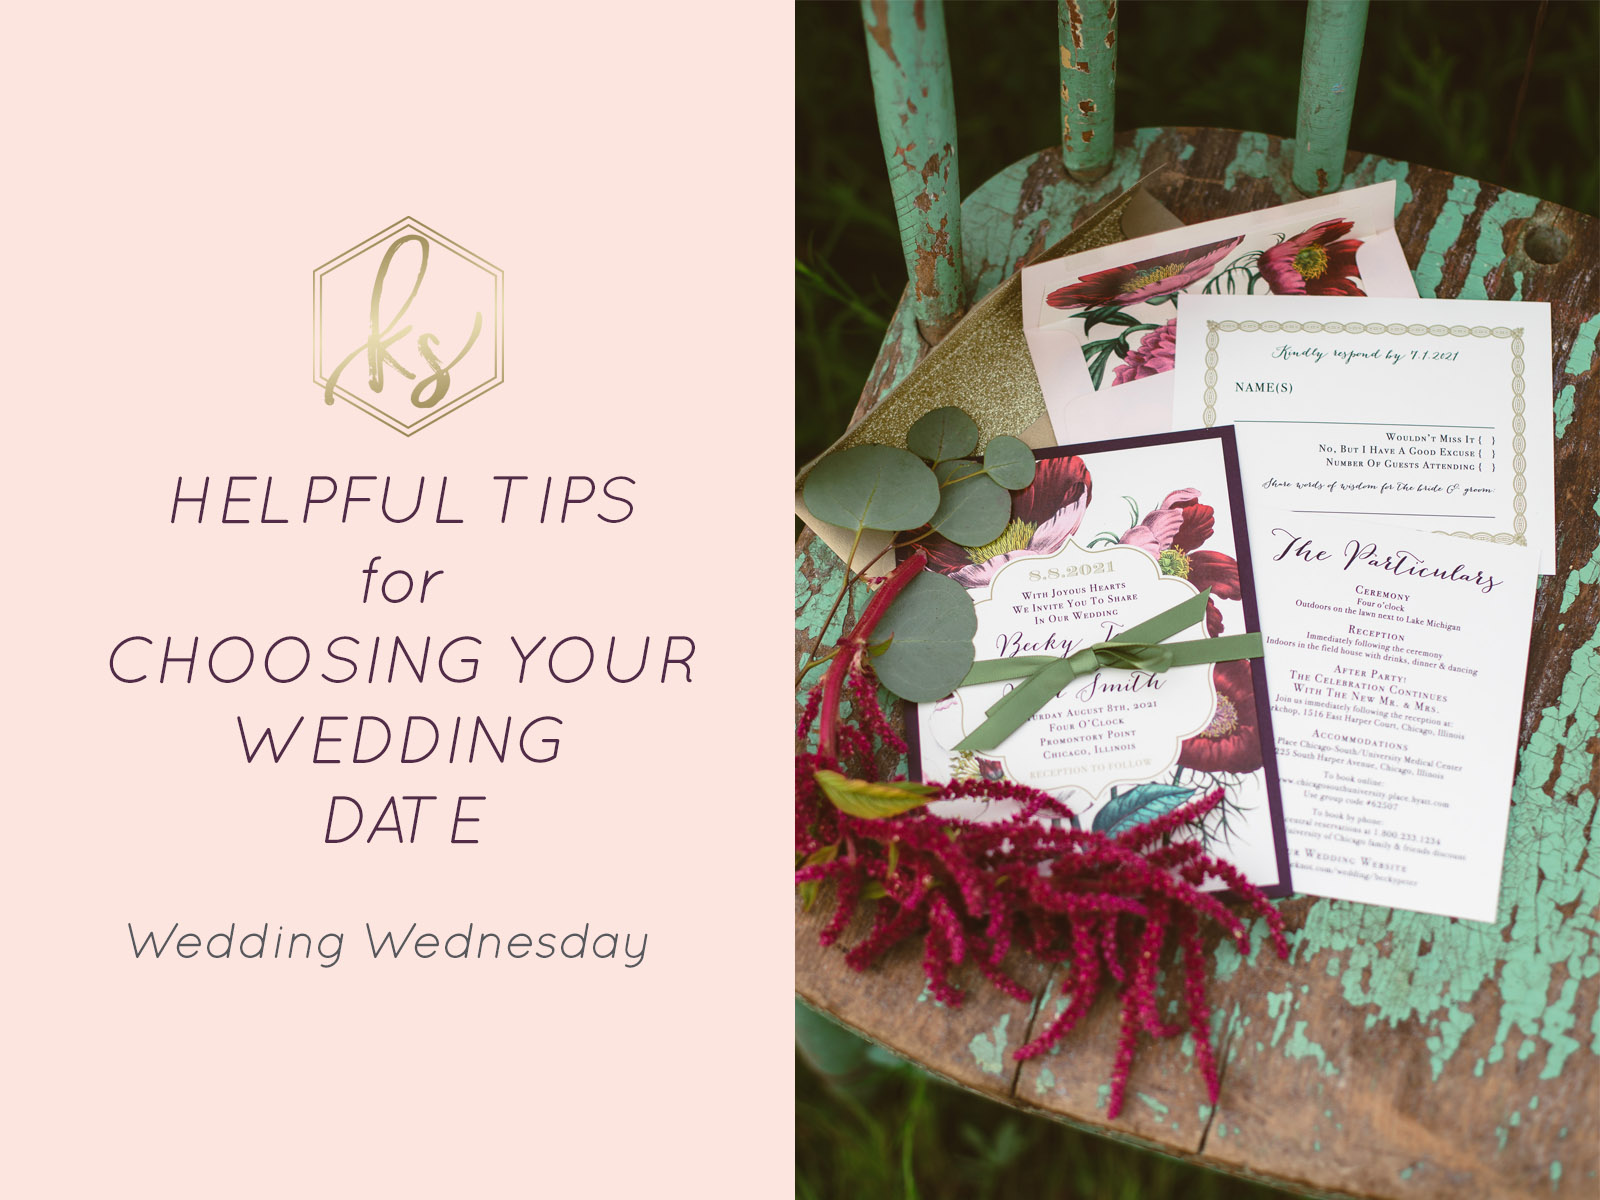 Helpful Tips for Choosing Your Wedding Date